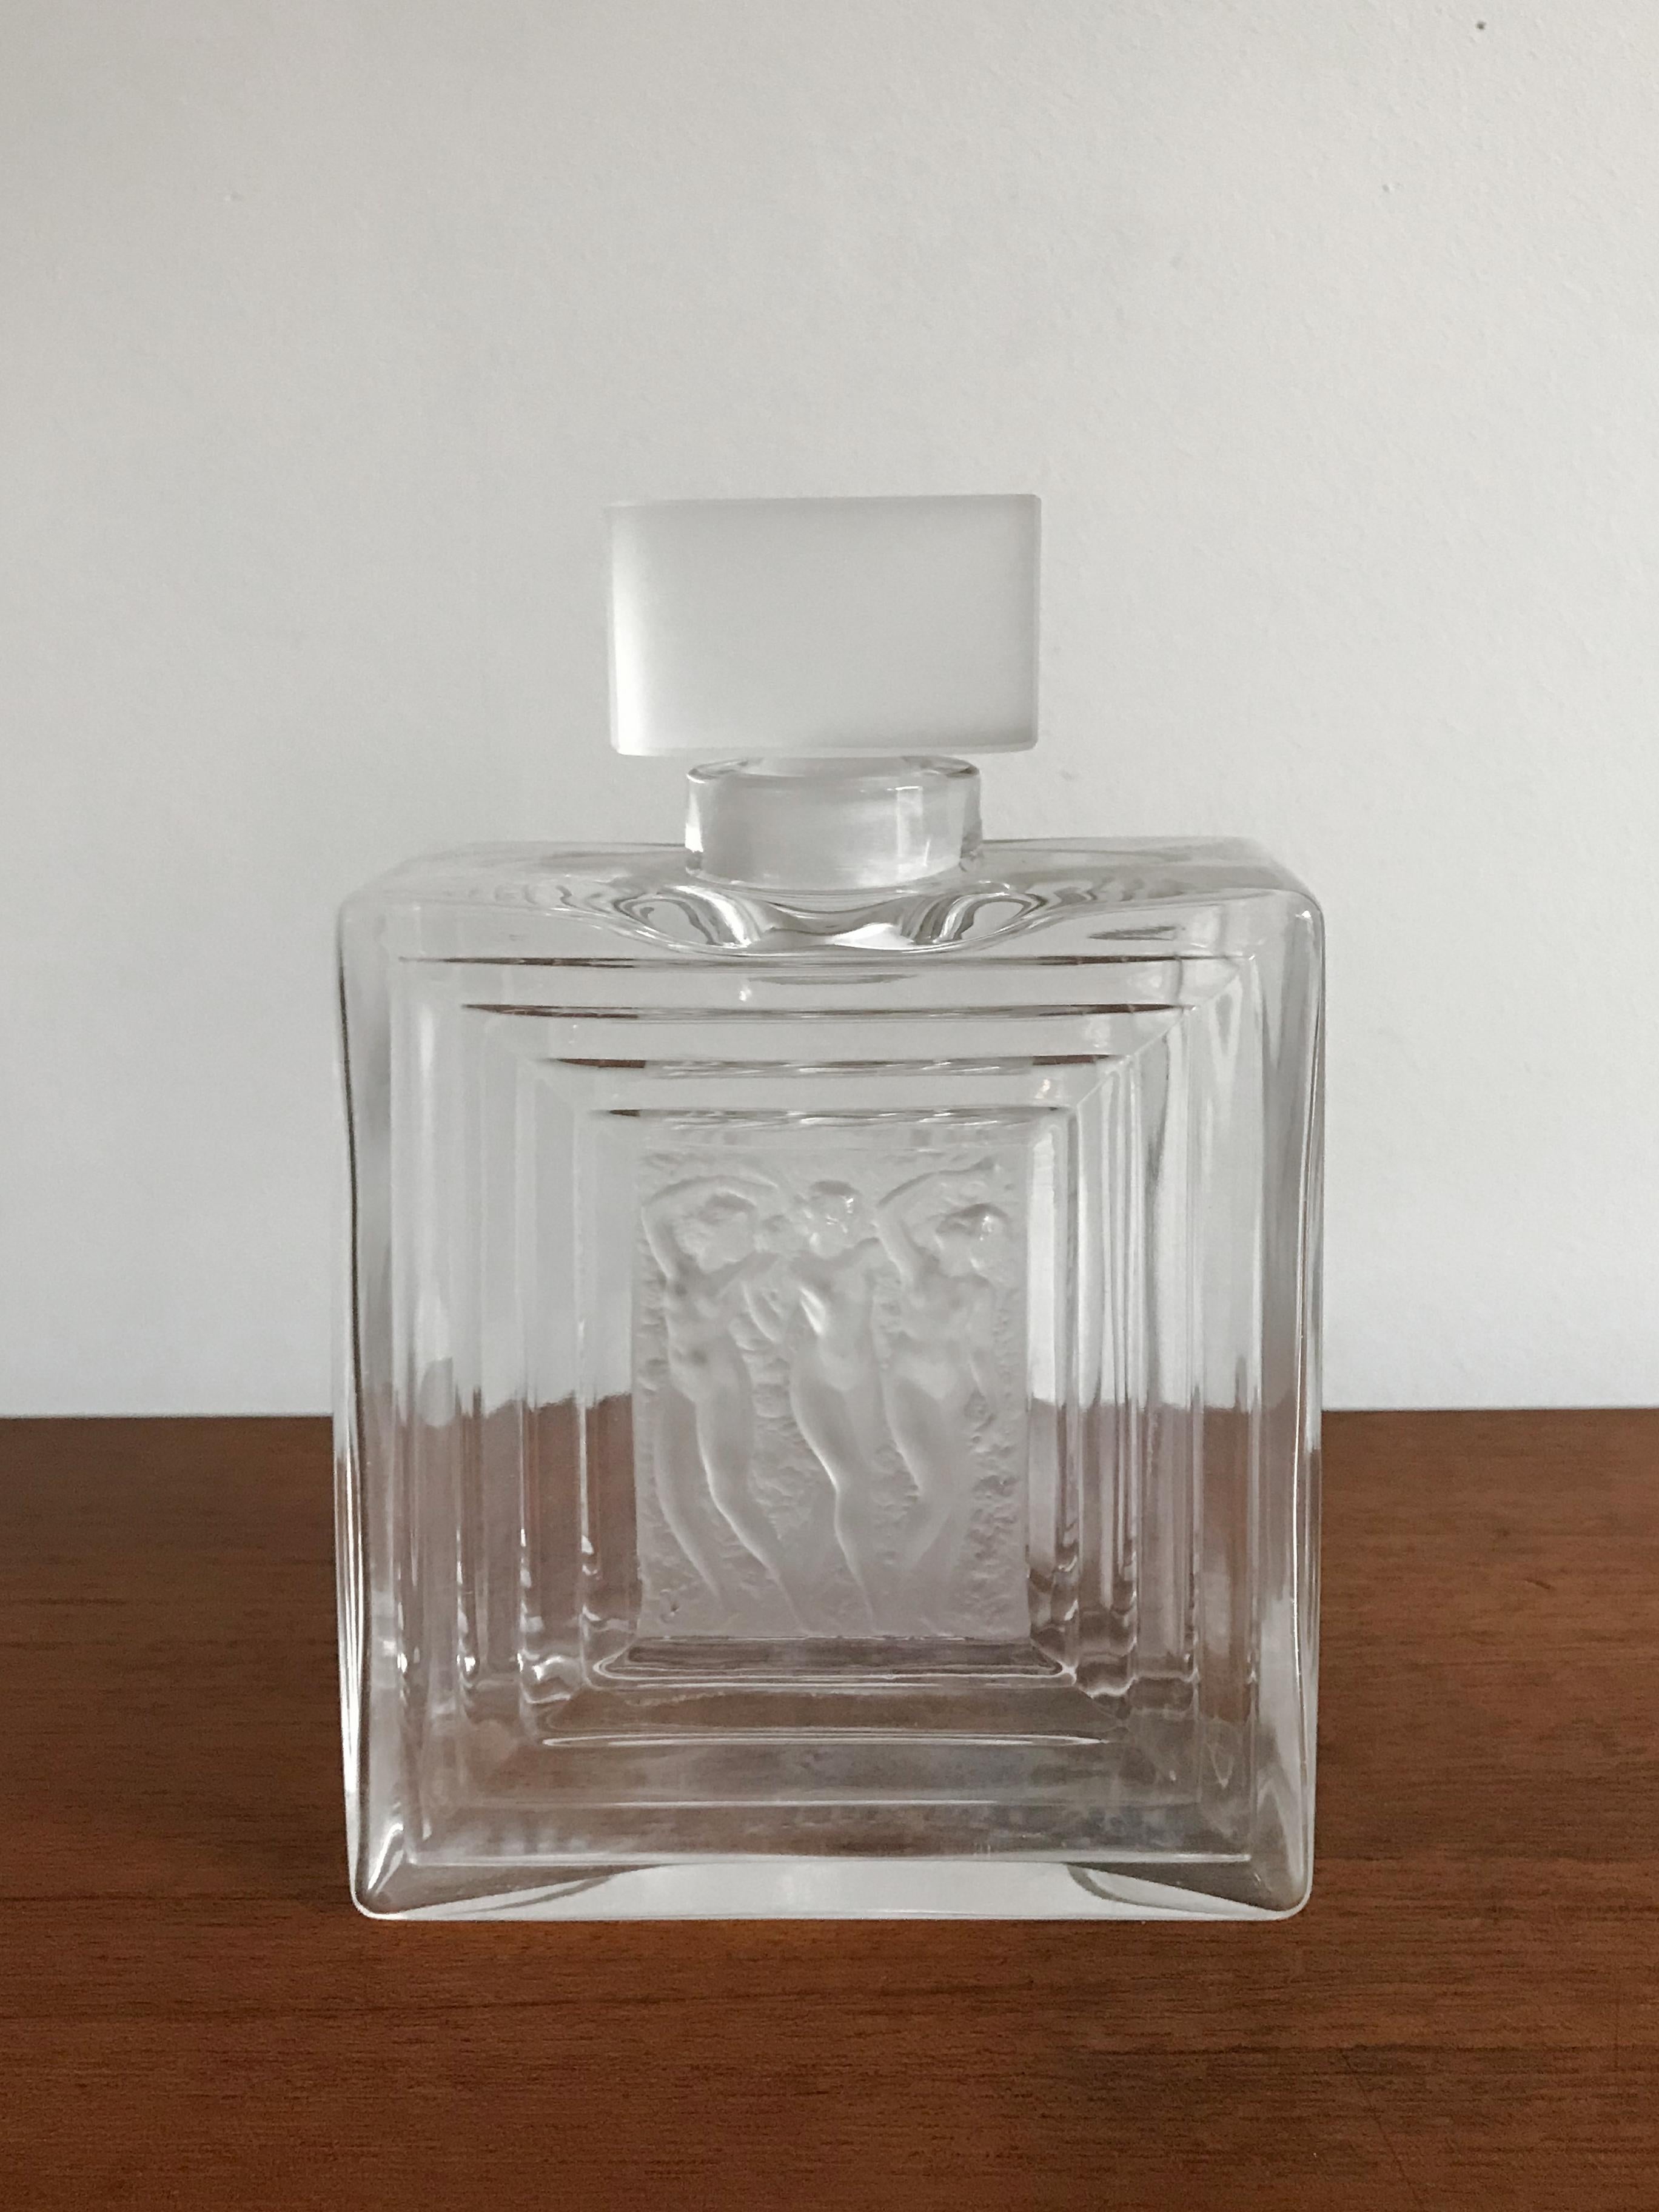 Perfume bottle in punched glass, vintage of modernism, Le Muse series produced by Lalique Francia, with mark engraved on the bottom, circa 1970s.